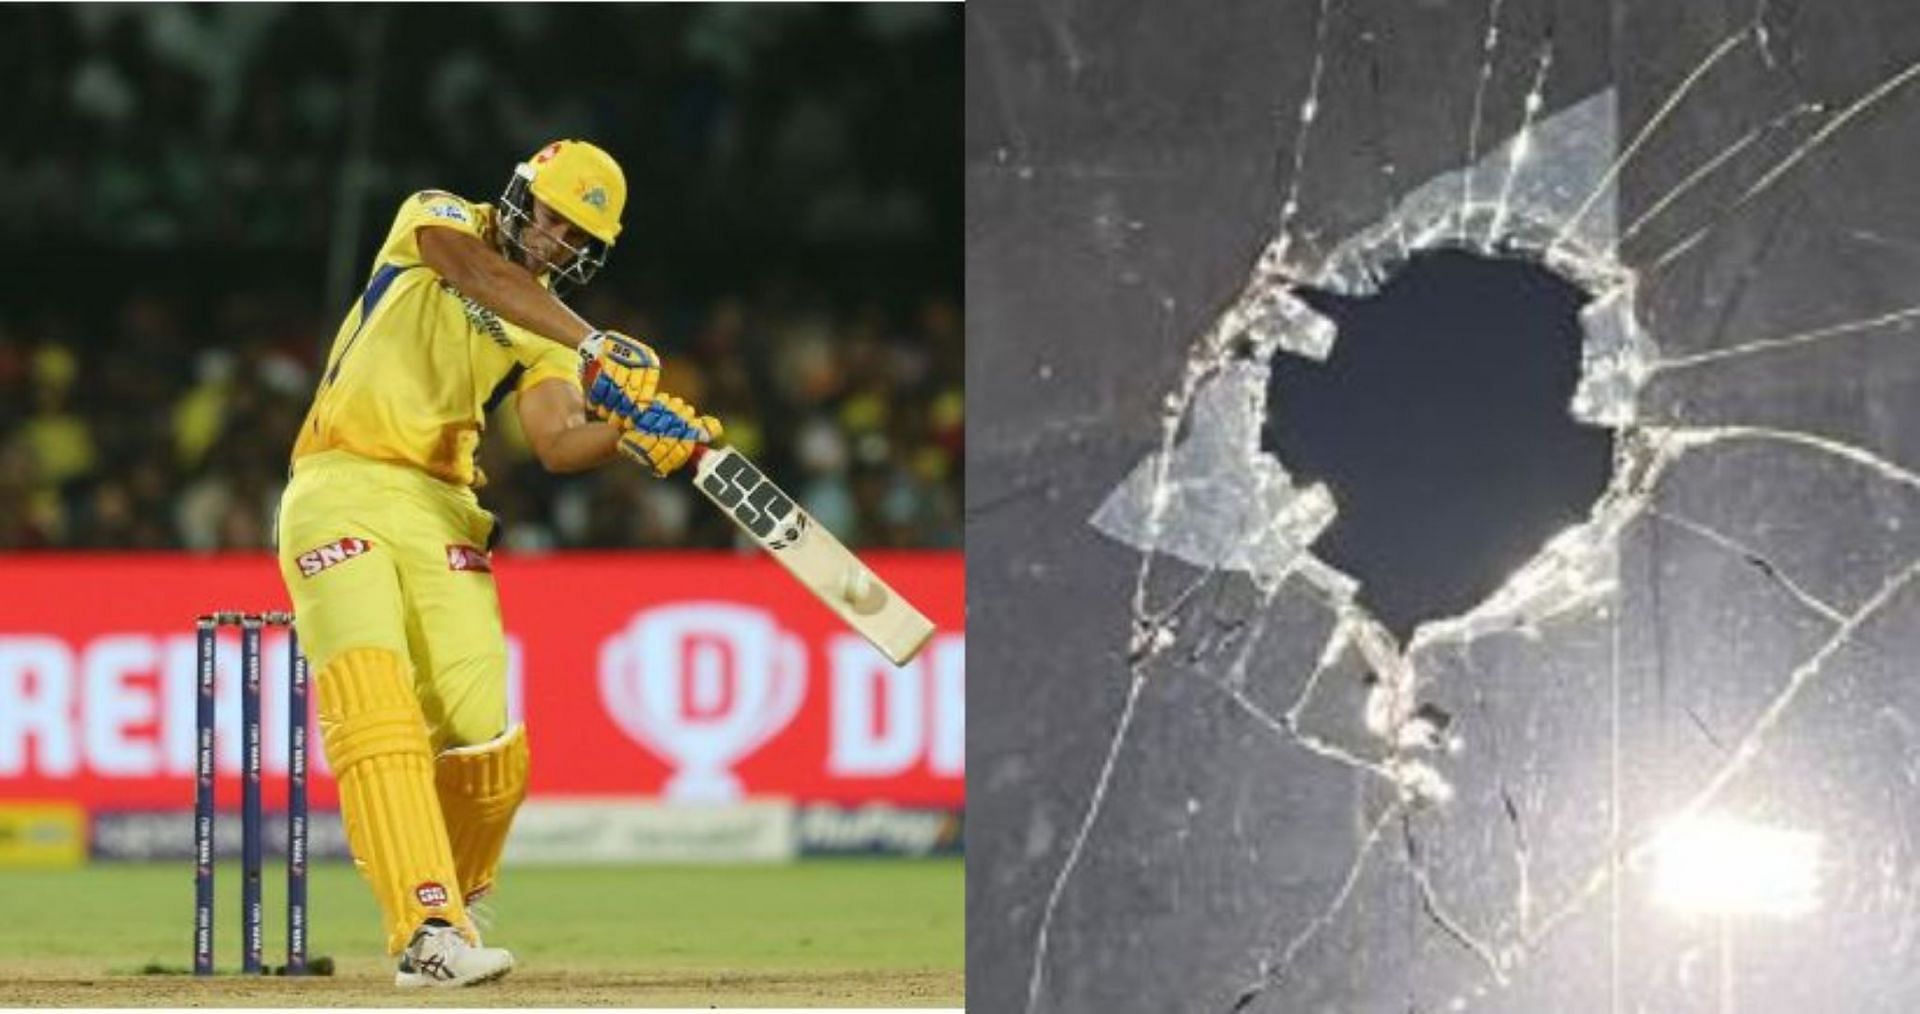 Shivam Dube has smashed several monstrous sixes for CSK in the IPL